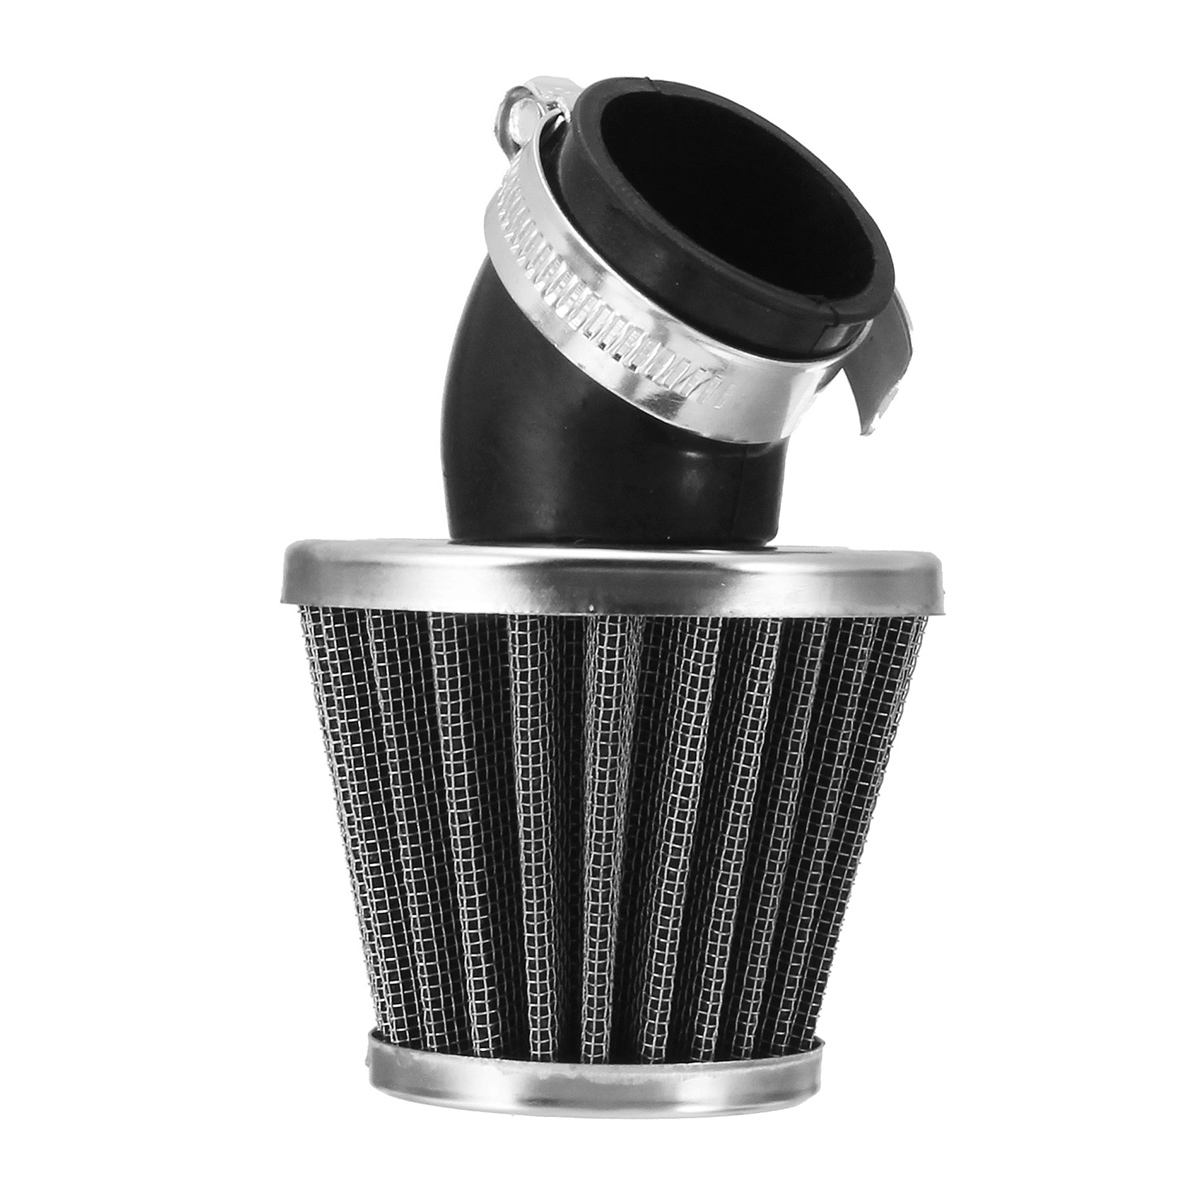 35-50MM-Air-Filter-Black-Fit-For-50-110-125-140CC-Pit-Dirt-Bike-Motorcycle-ATV-Scooter-1199679